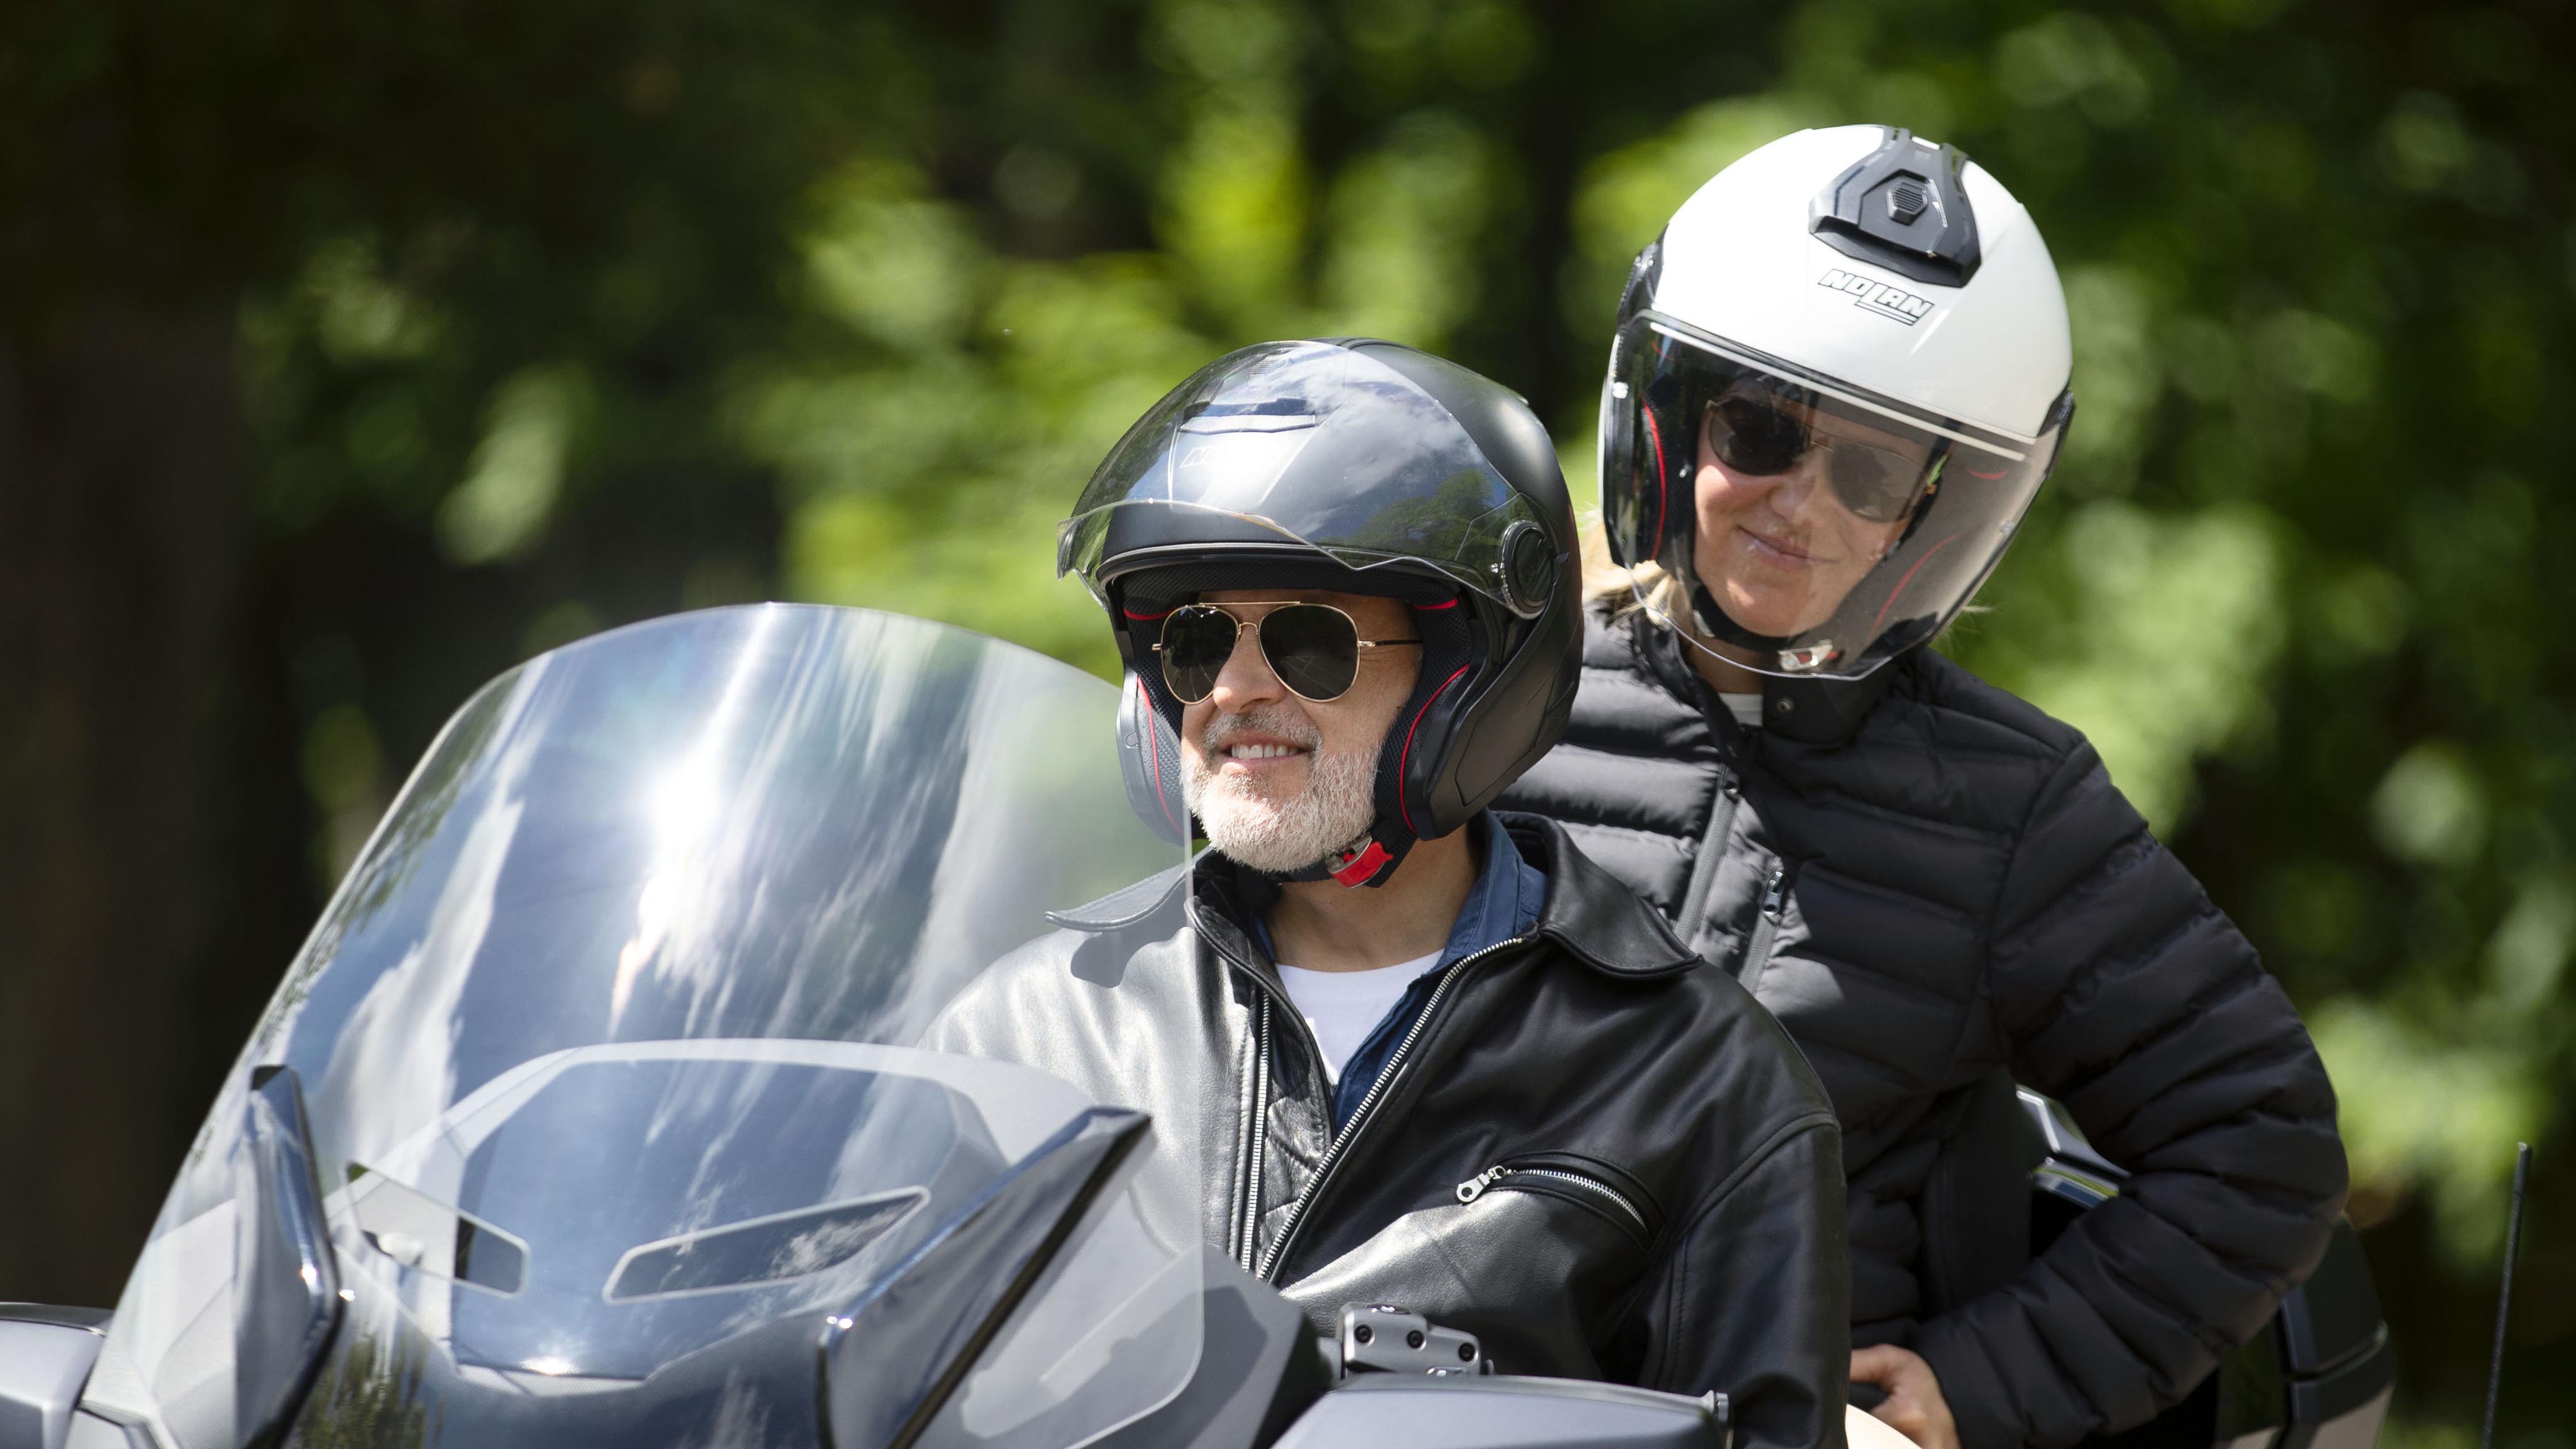 Man and woman geared with helmets on their Can-Am Rider